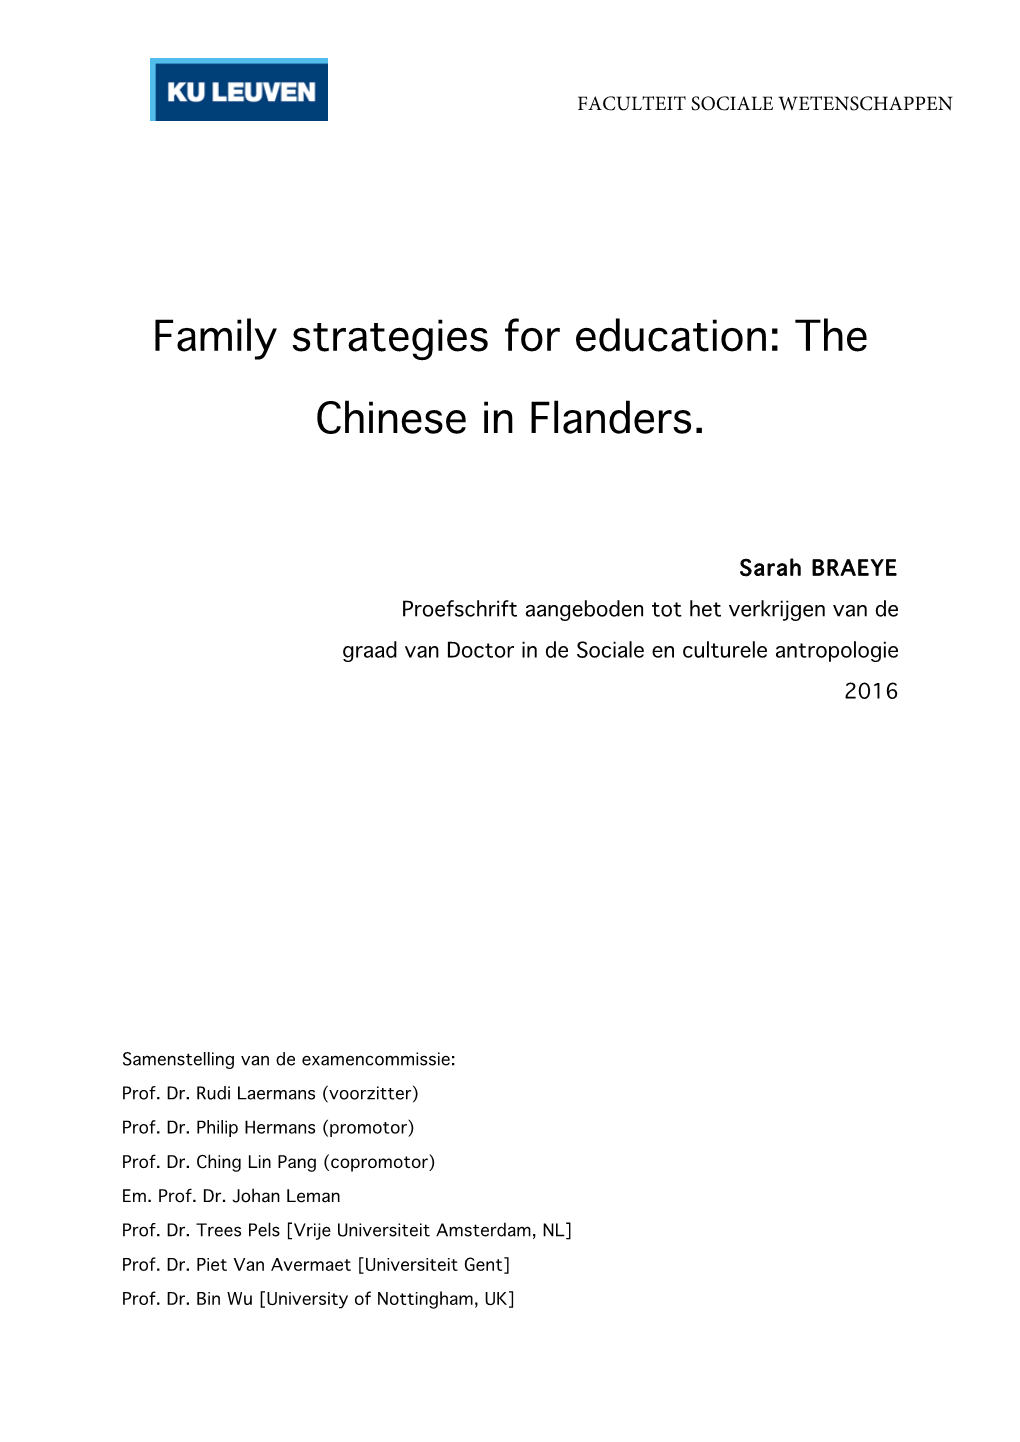 Family Strategies for Education: the Chinese in Flanders